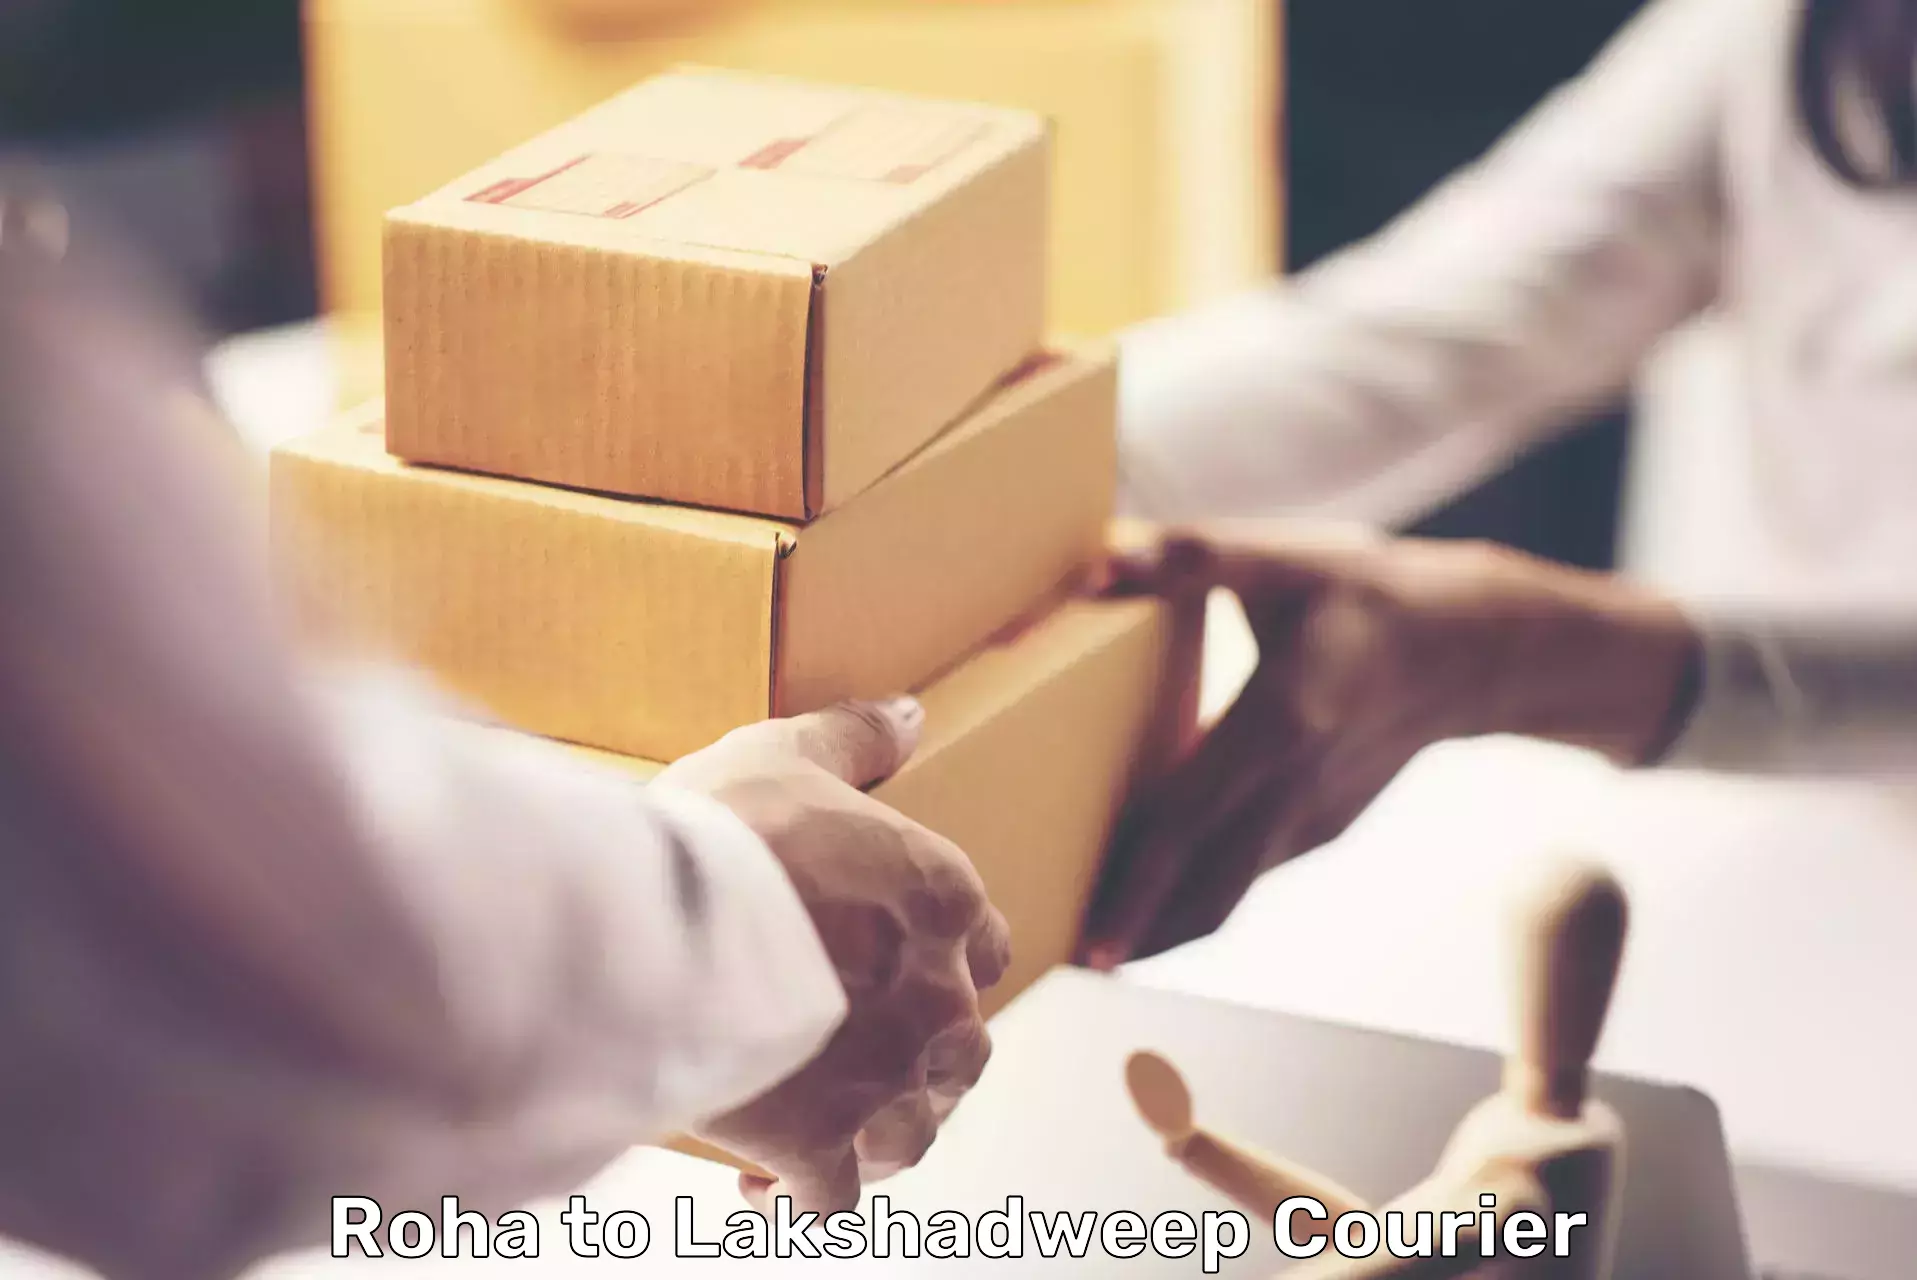 Efficient order fulfillment in Roha to Lakshadweep